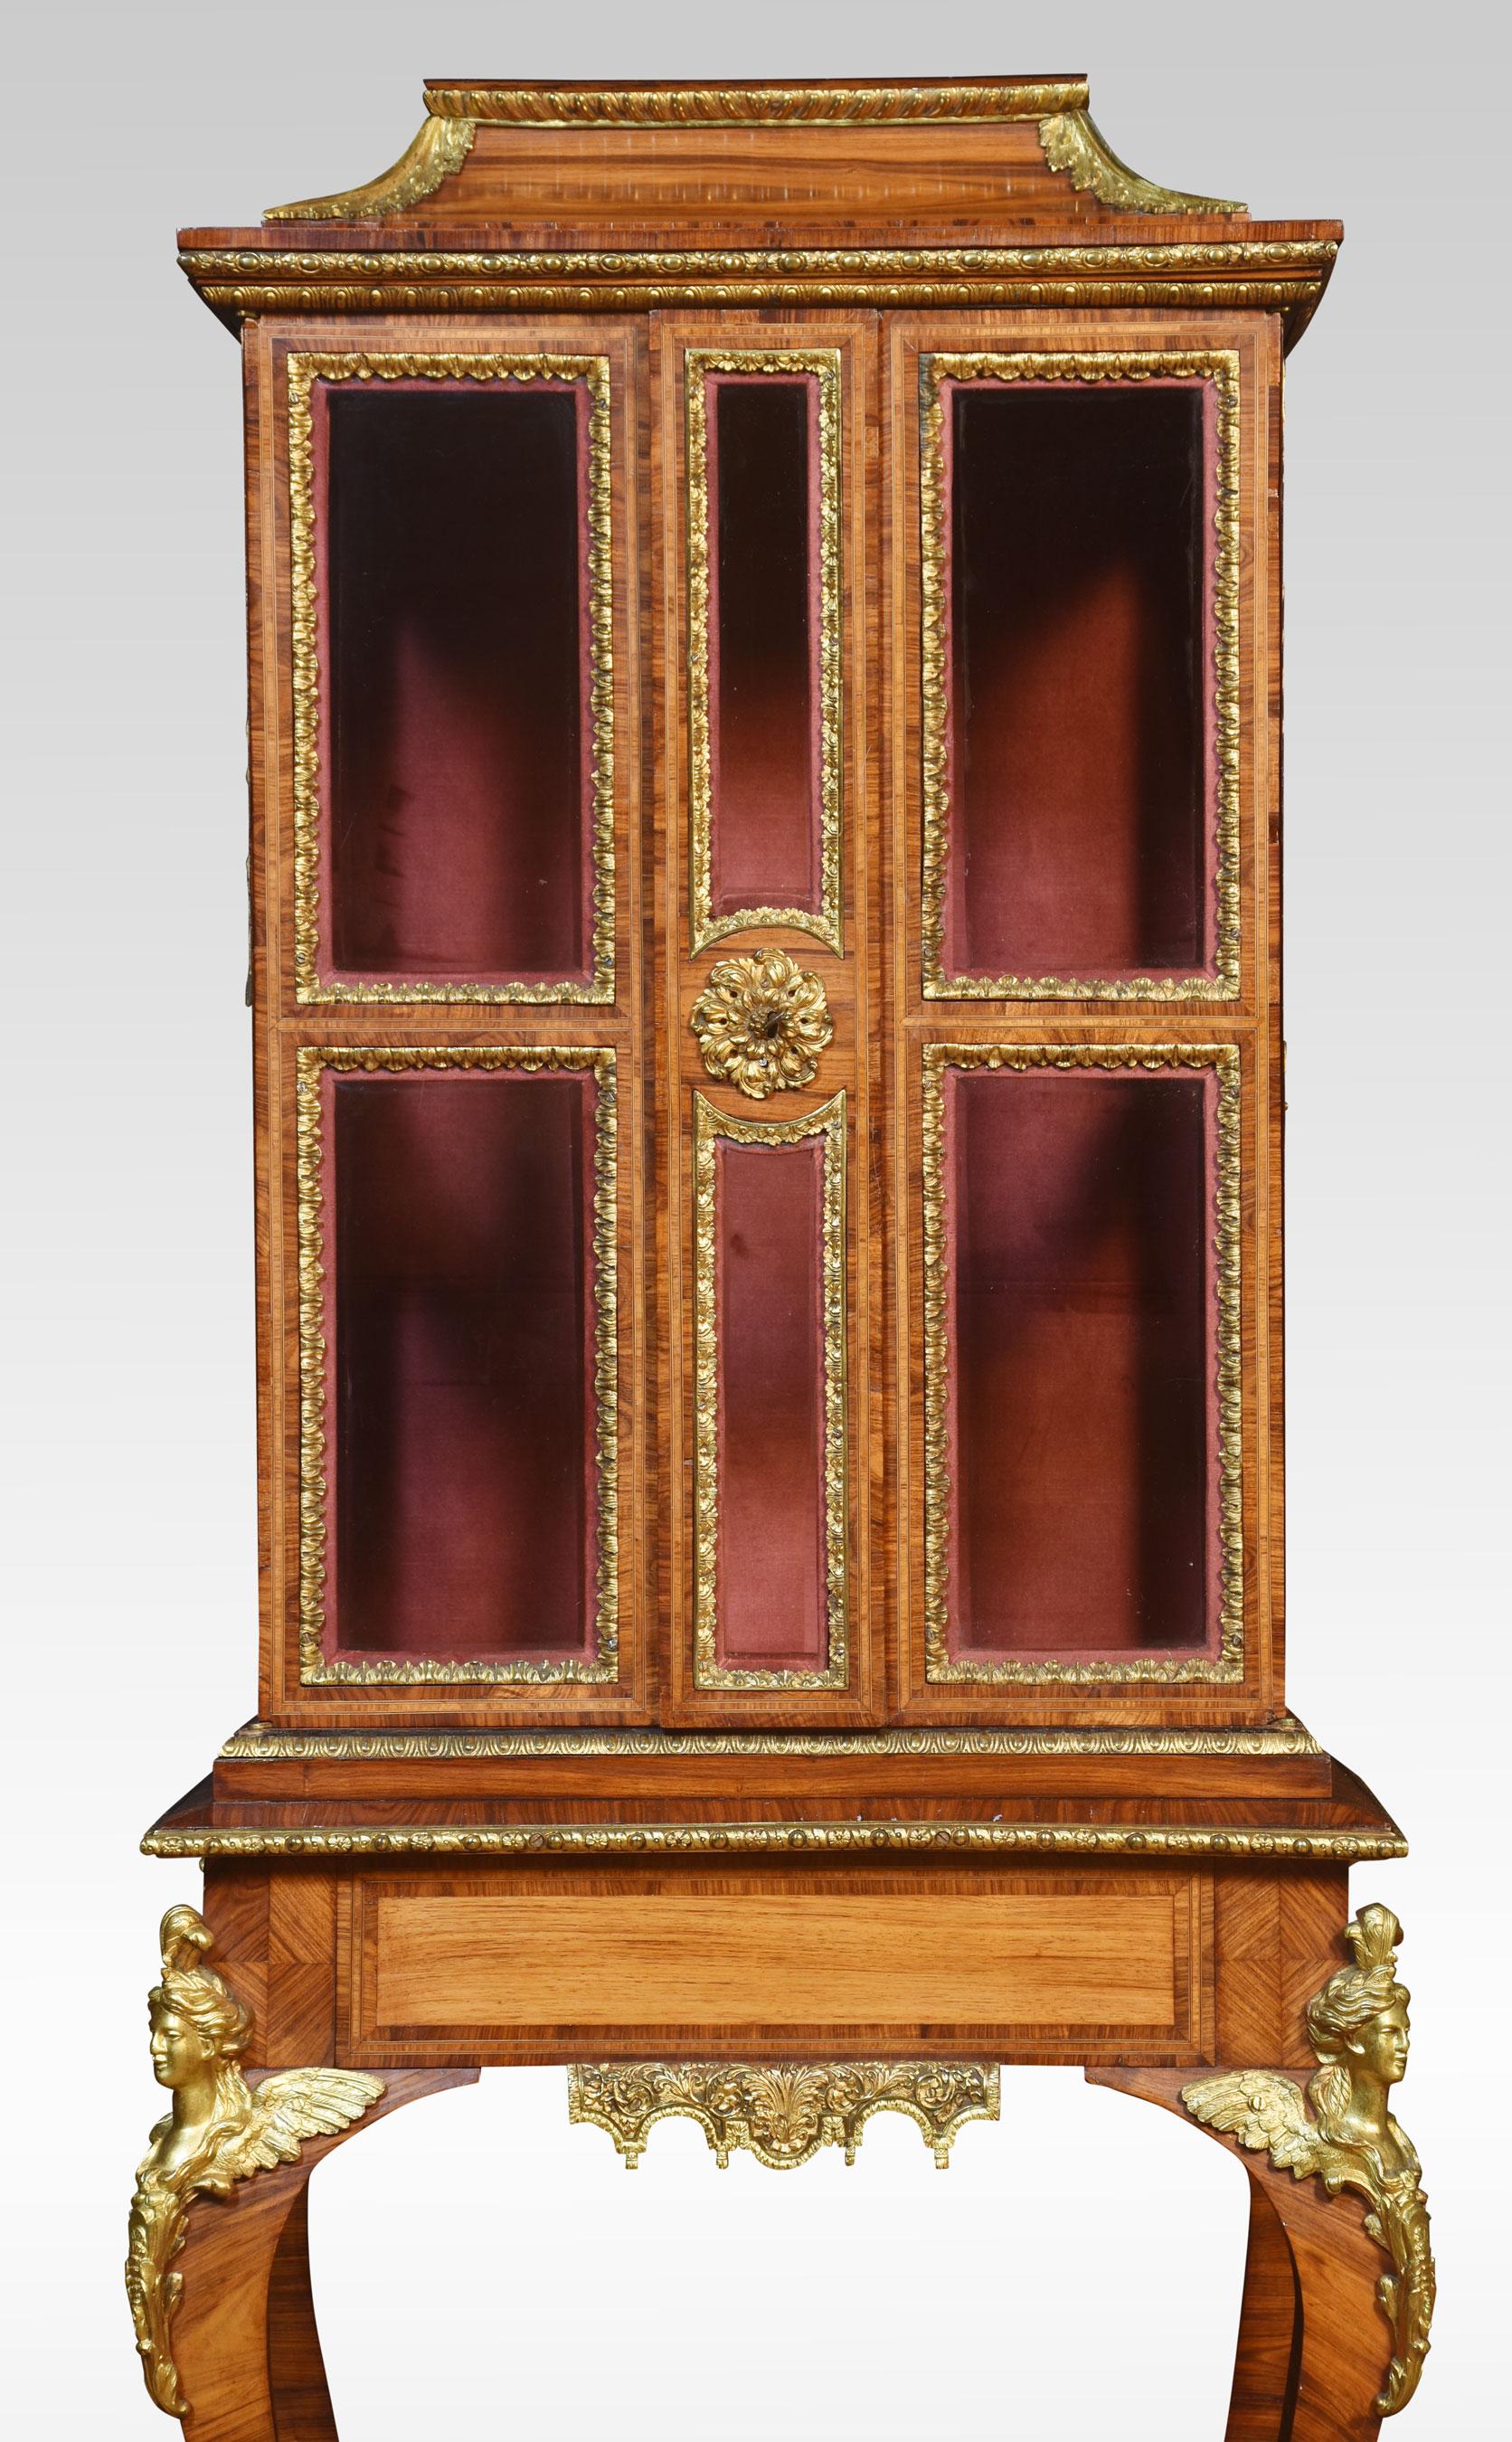 Kingwood collectors cabinet on stands the moulded pagoda-style top above bevelled glazed doors opening to reveal a velvet-lined interior and single glass shelf. The base section fitted with freeze drawer raised on four slender cabriole supports